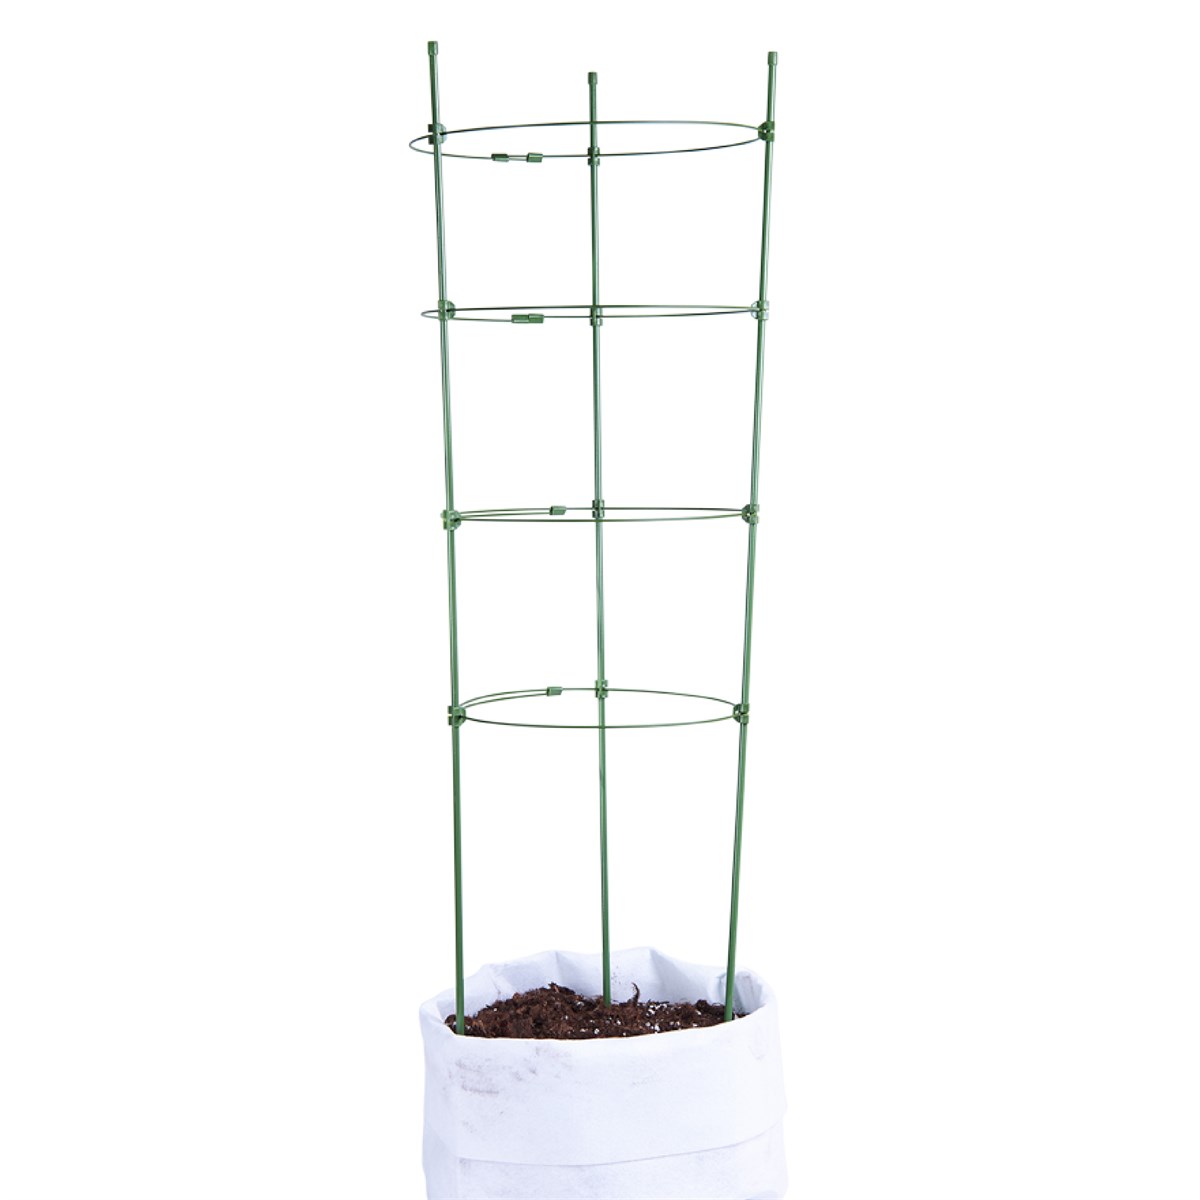 Collapsible Plant Supports